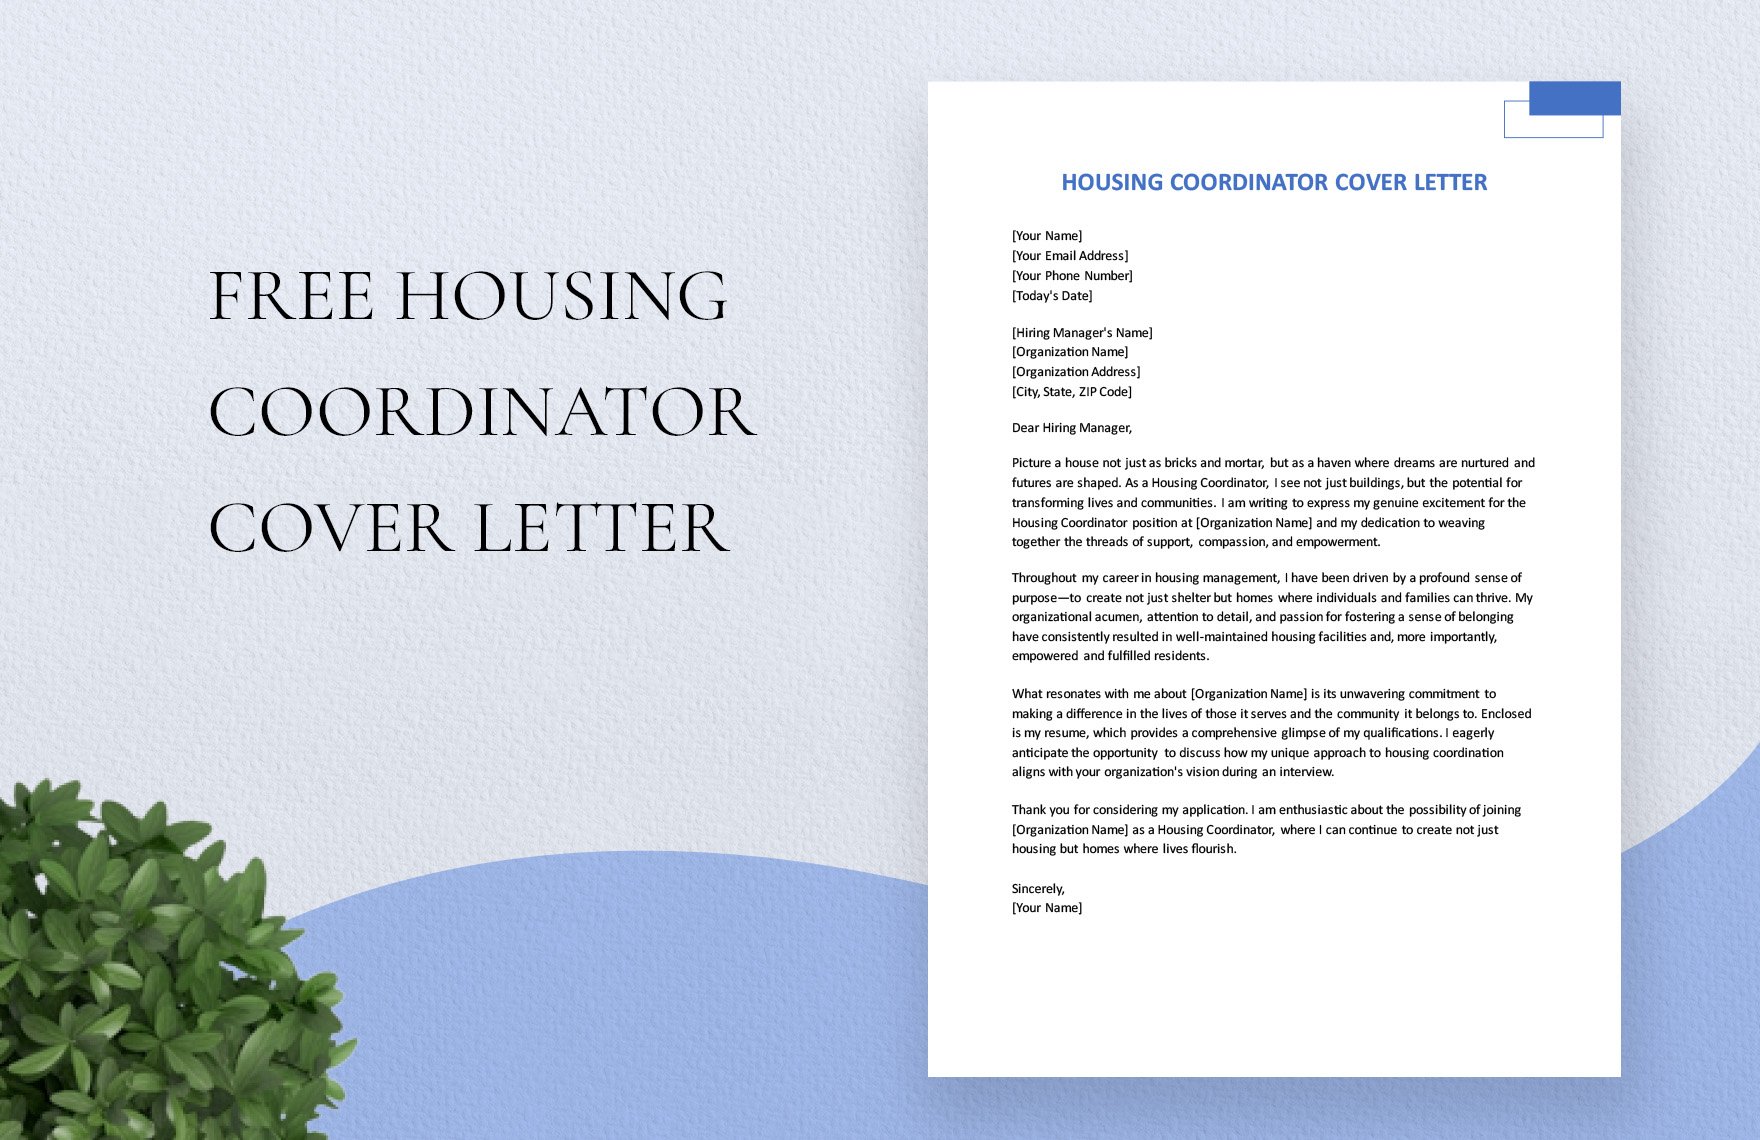 Housing Coordinator Cover Letter